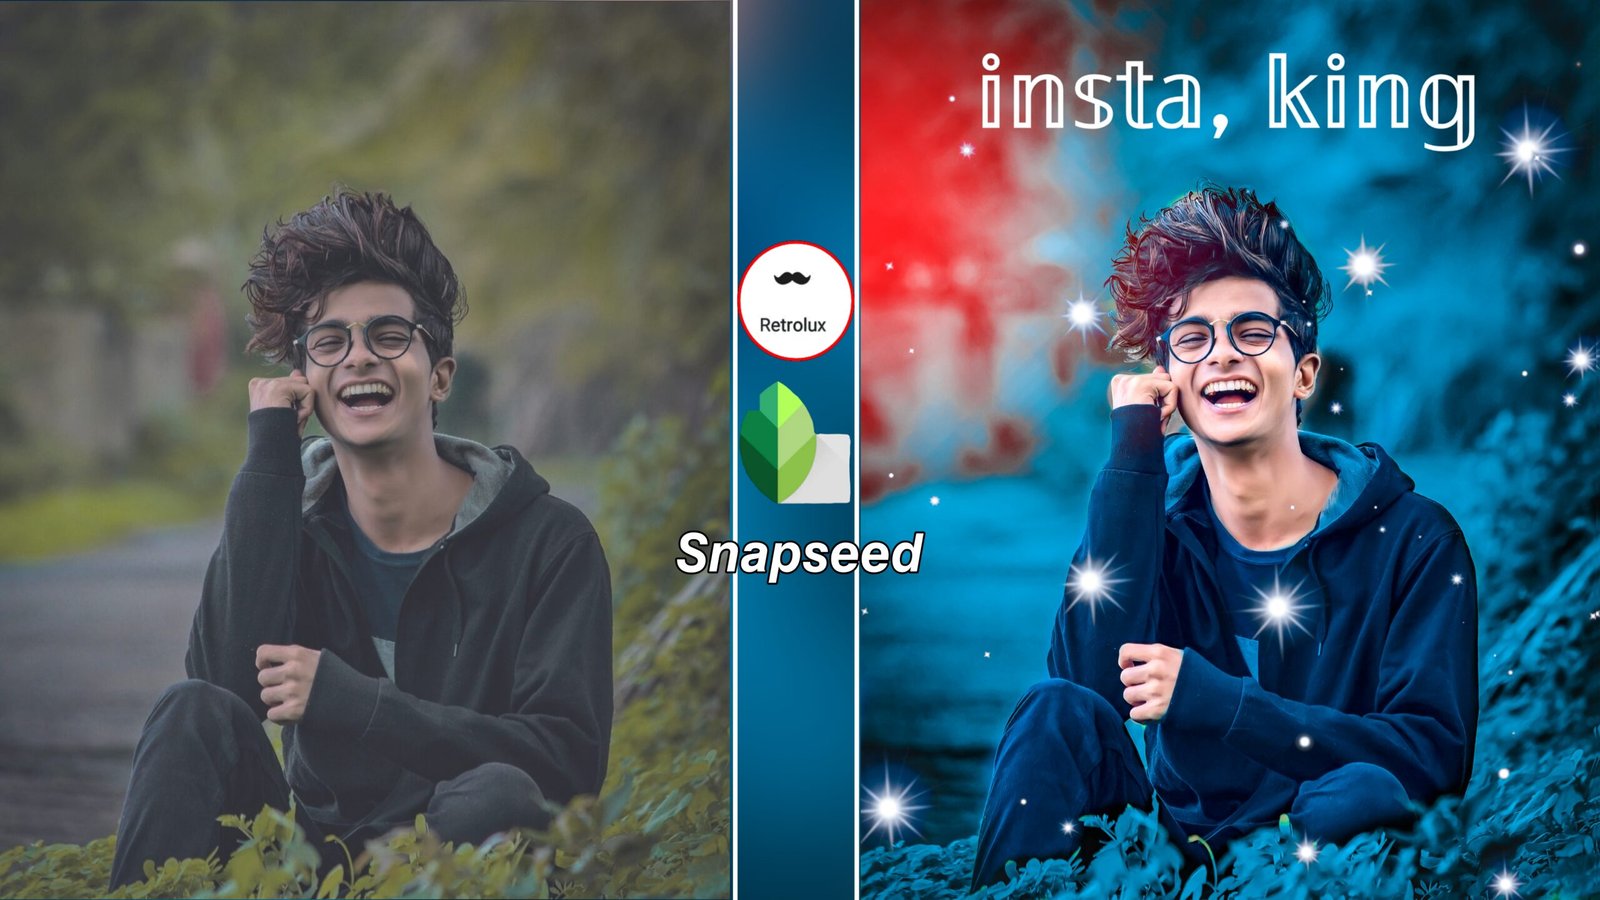 snapseed just 2 click red + blue backgrounds Insta king photo editing